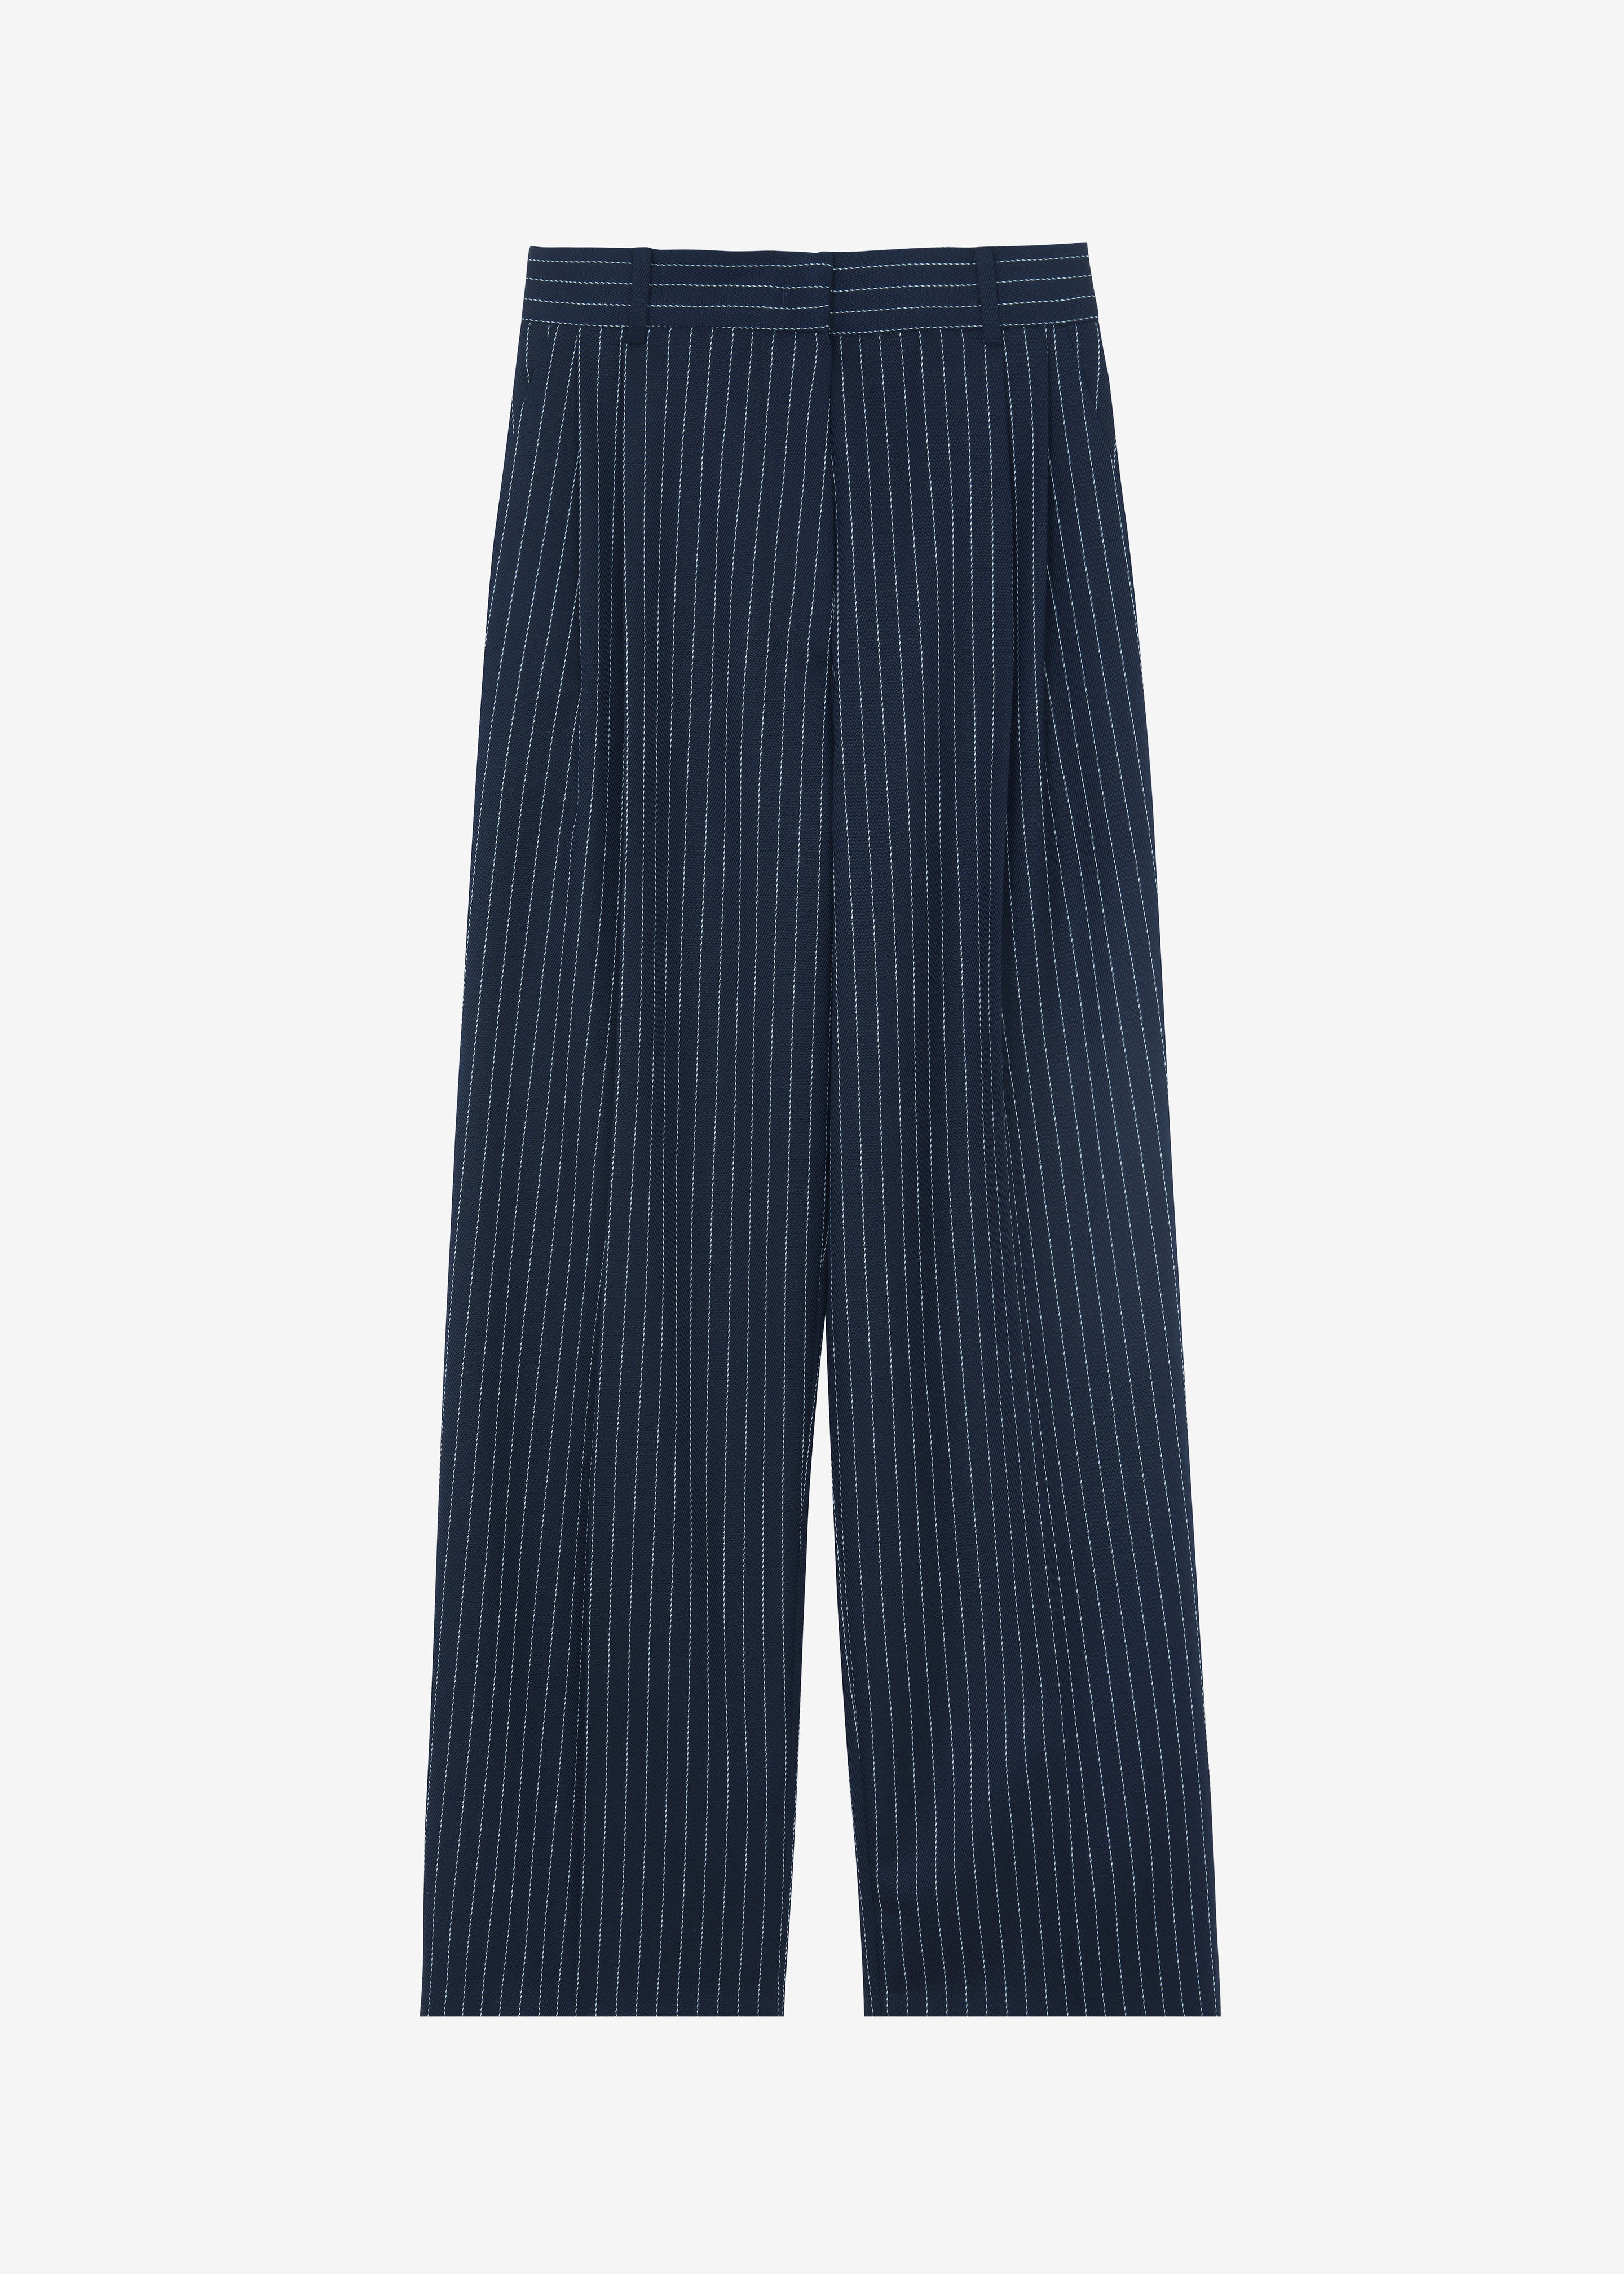 Ripley Pleated Twill Trousers - Navy/White Pinstripe - 11